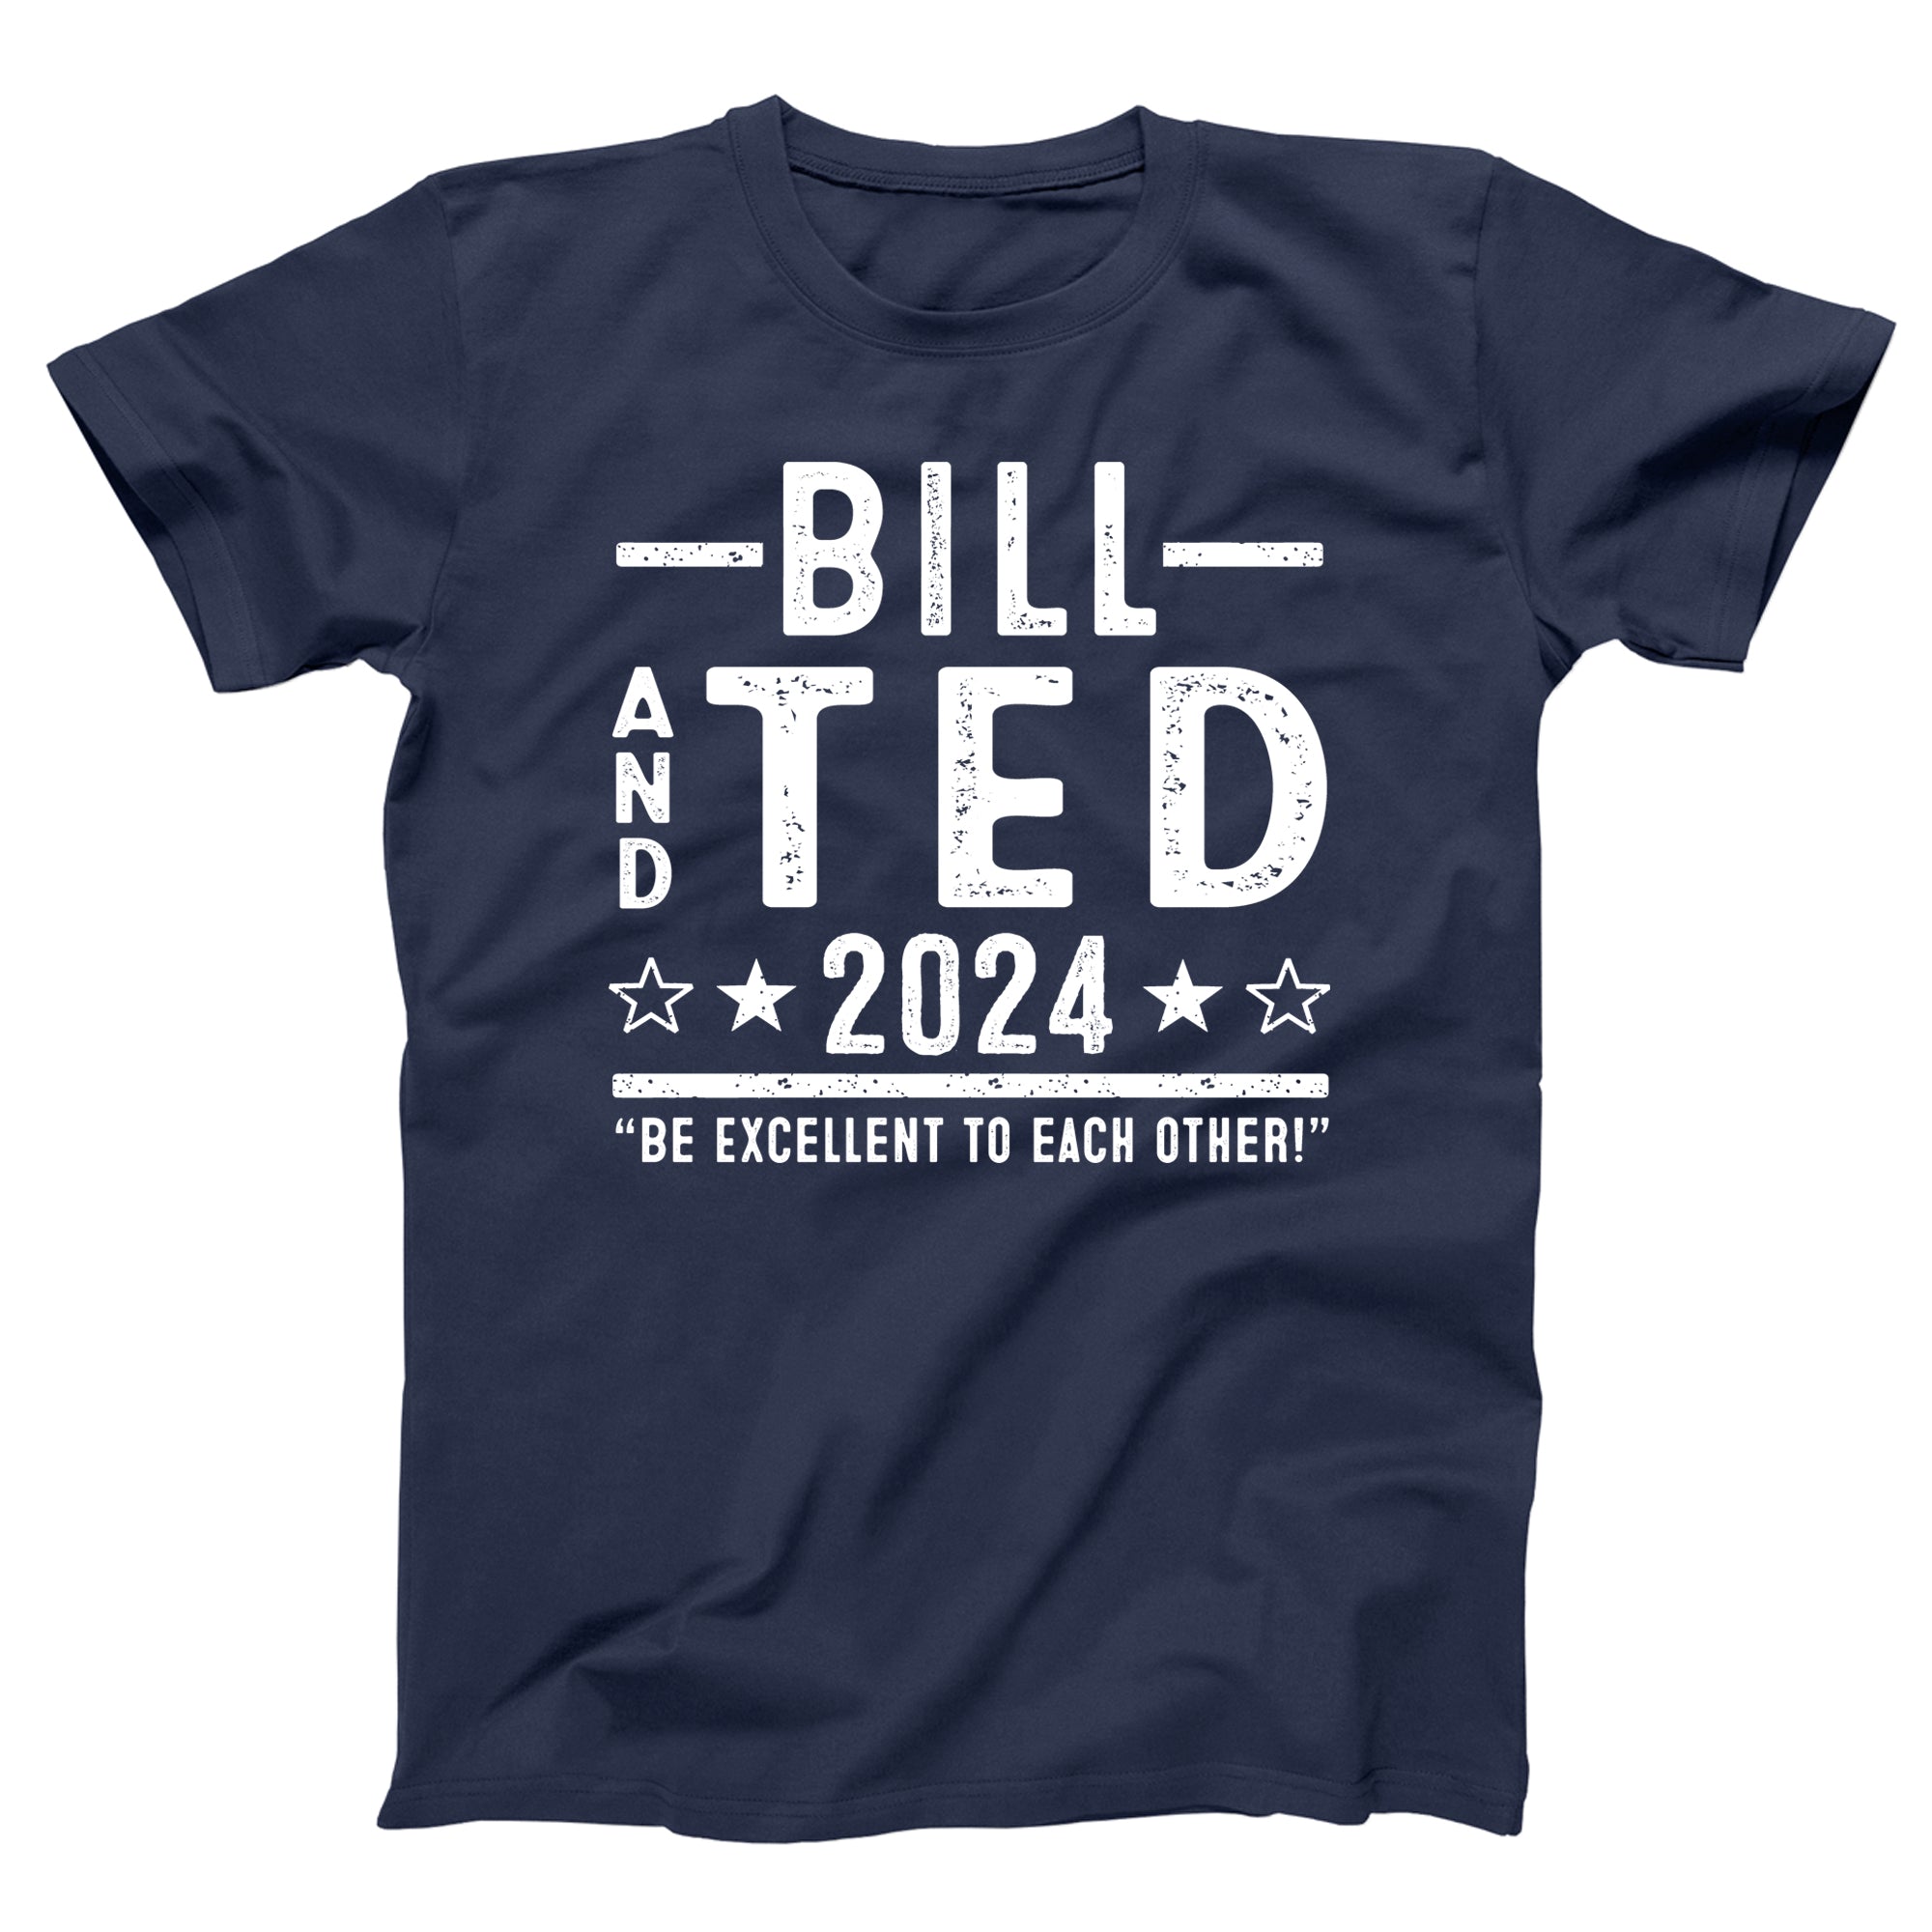 Bill and Ted 2024 Election Tshirt - Donkey Tees